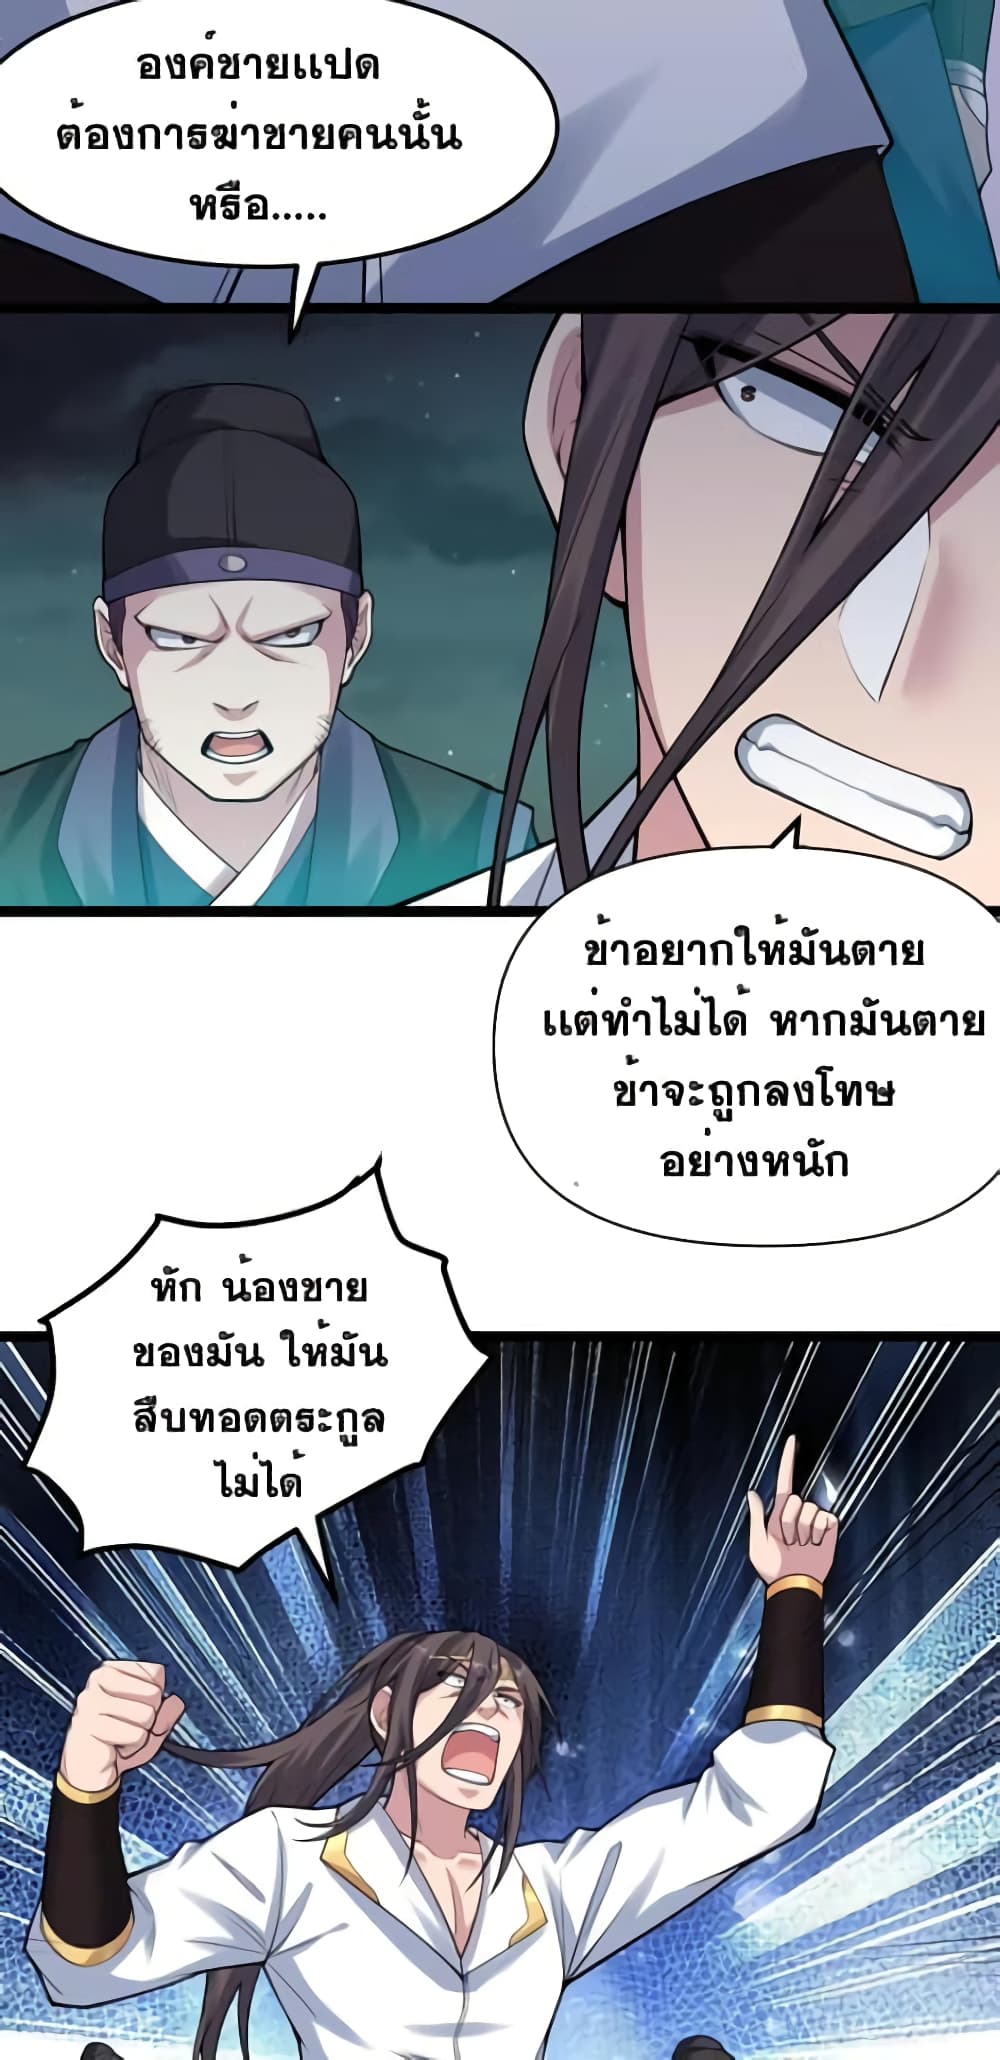 Godsian Masian from Another World ตอนที่ 106 (15)